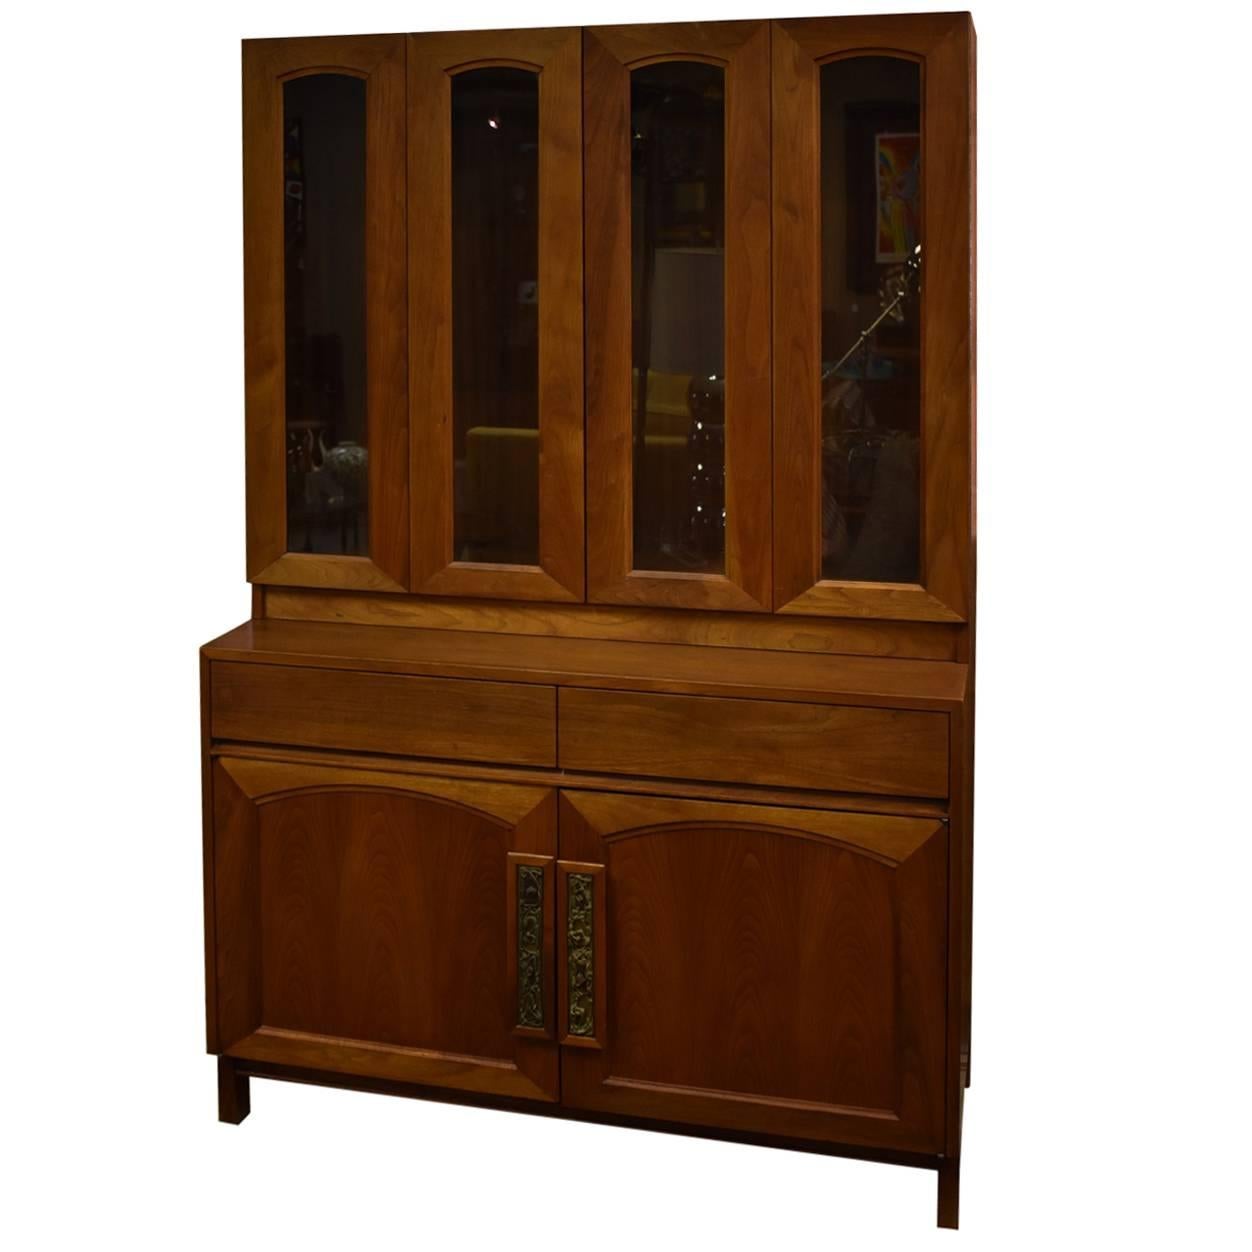 Two-Piece Teak China Cabinet Designed by John Keal for Brown Saltman